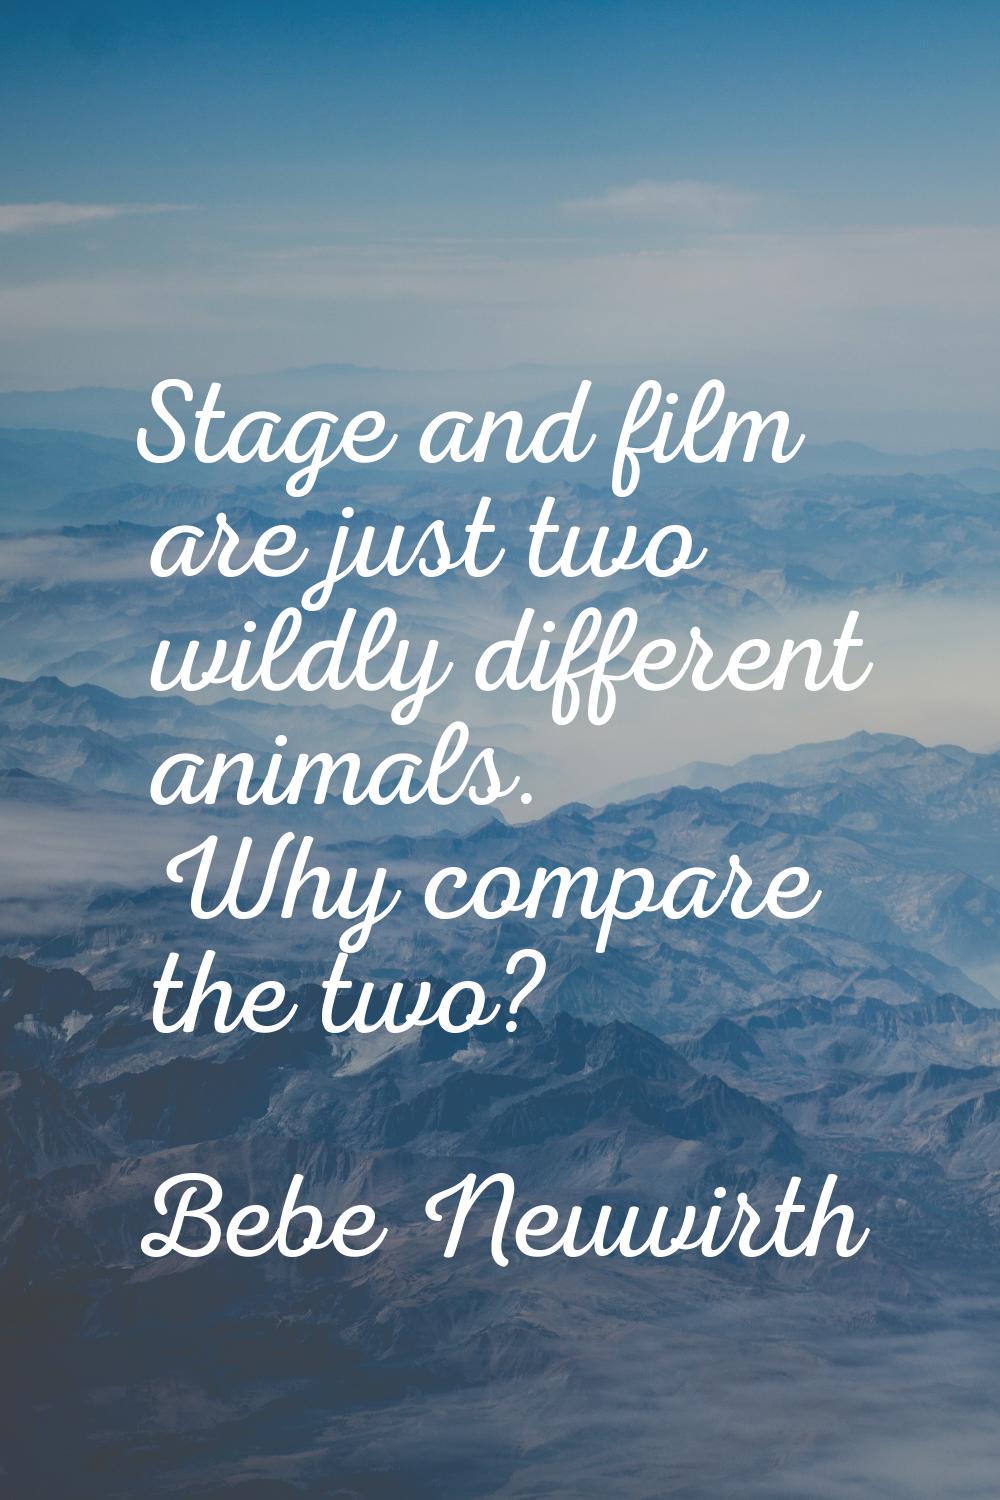 Stage and film are just two wildly different animals. Why compare the two?